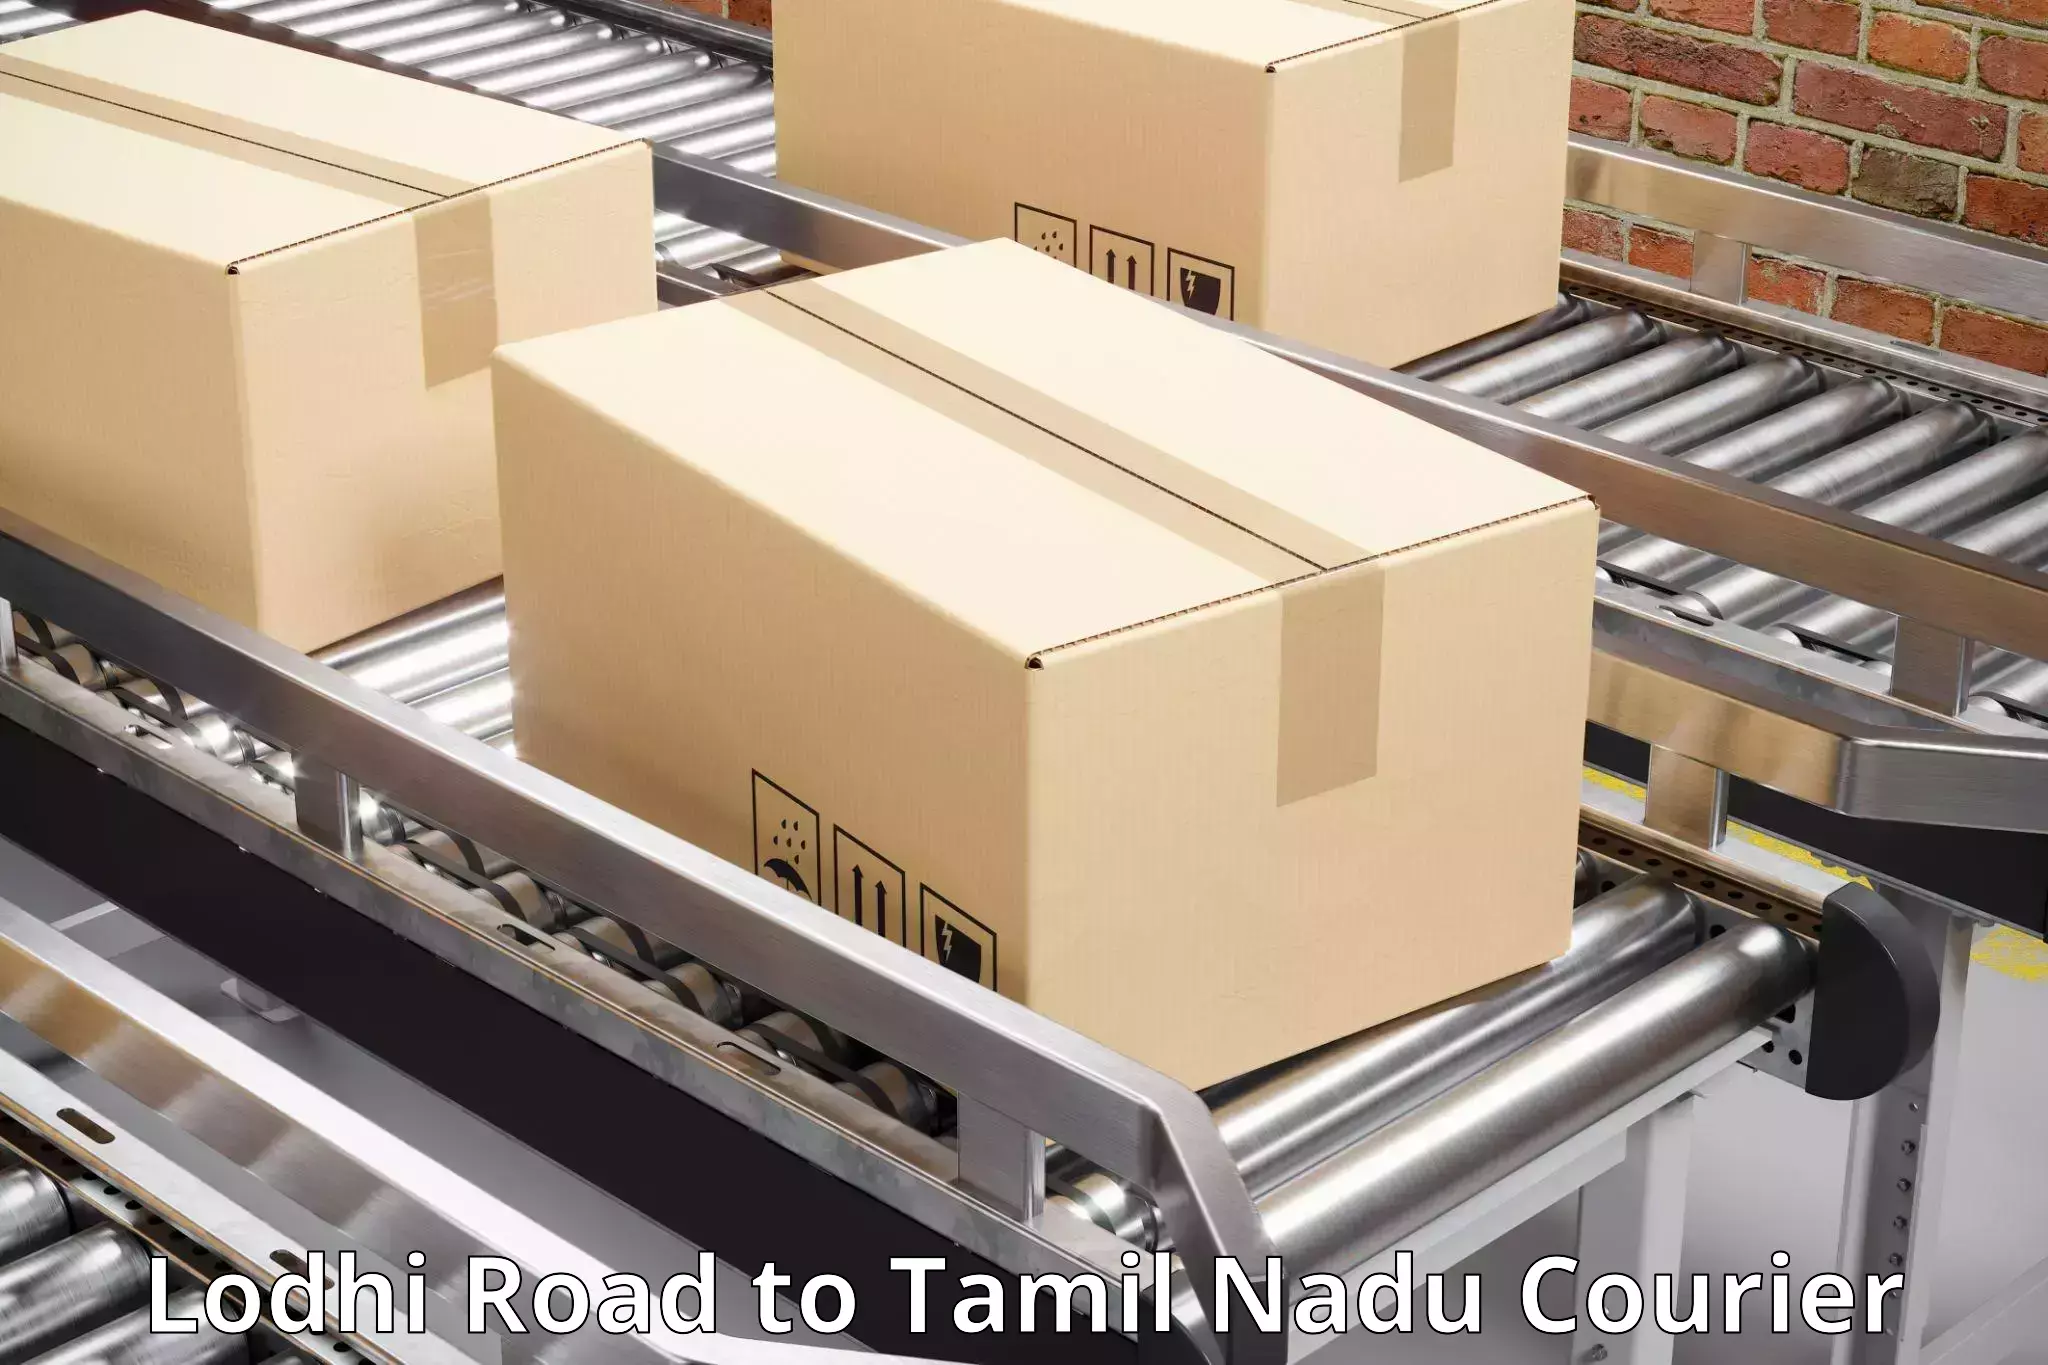 Corporate courier solutions Lodhi Road to Tamil Nadu